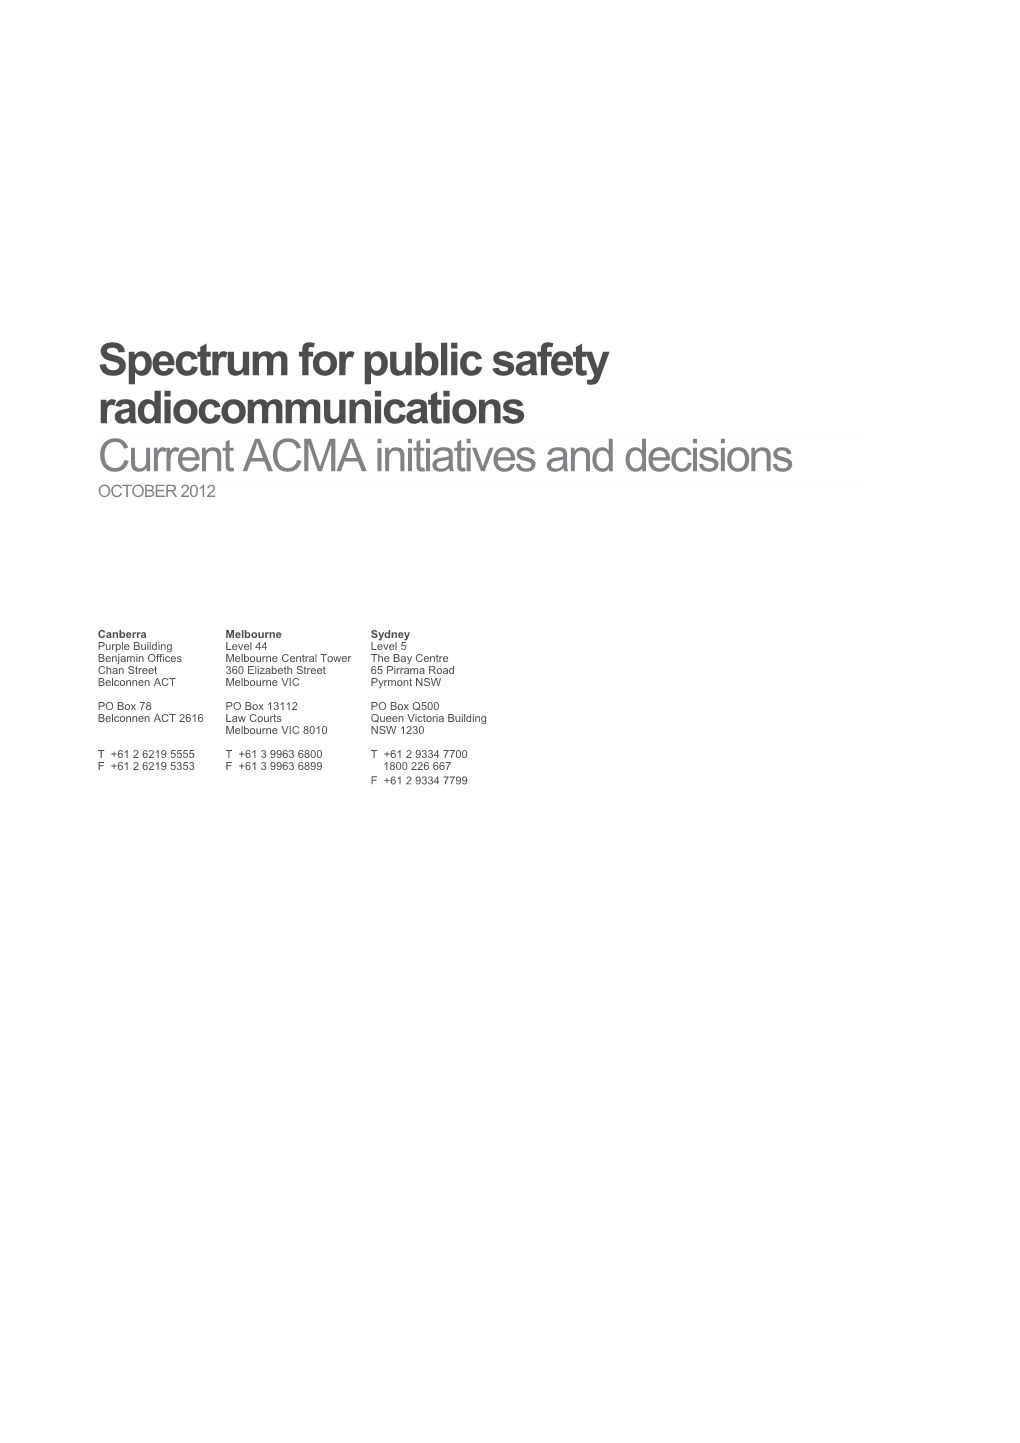 Spectrum for Public Safety Radiocommunications - Current ACMA Initiatives and Decisions